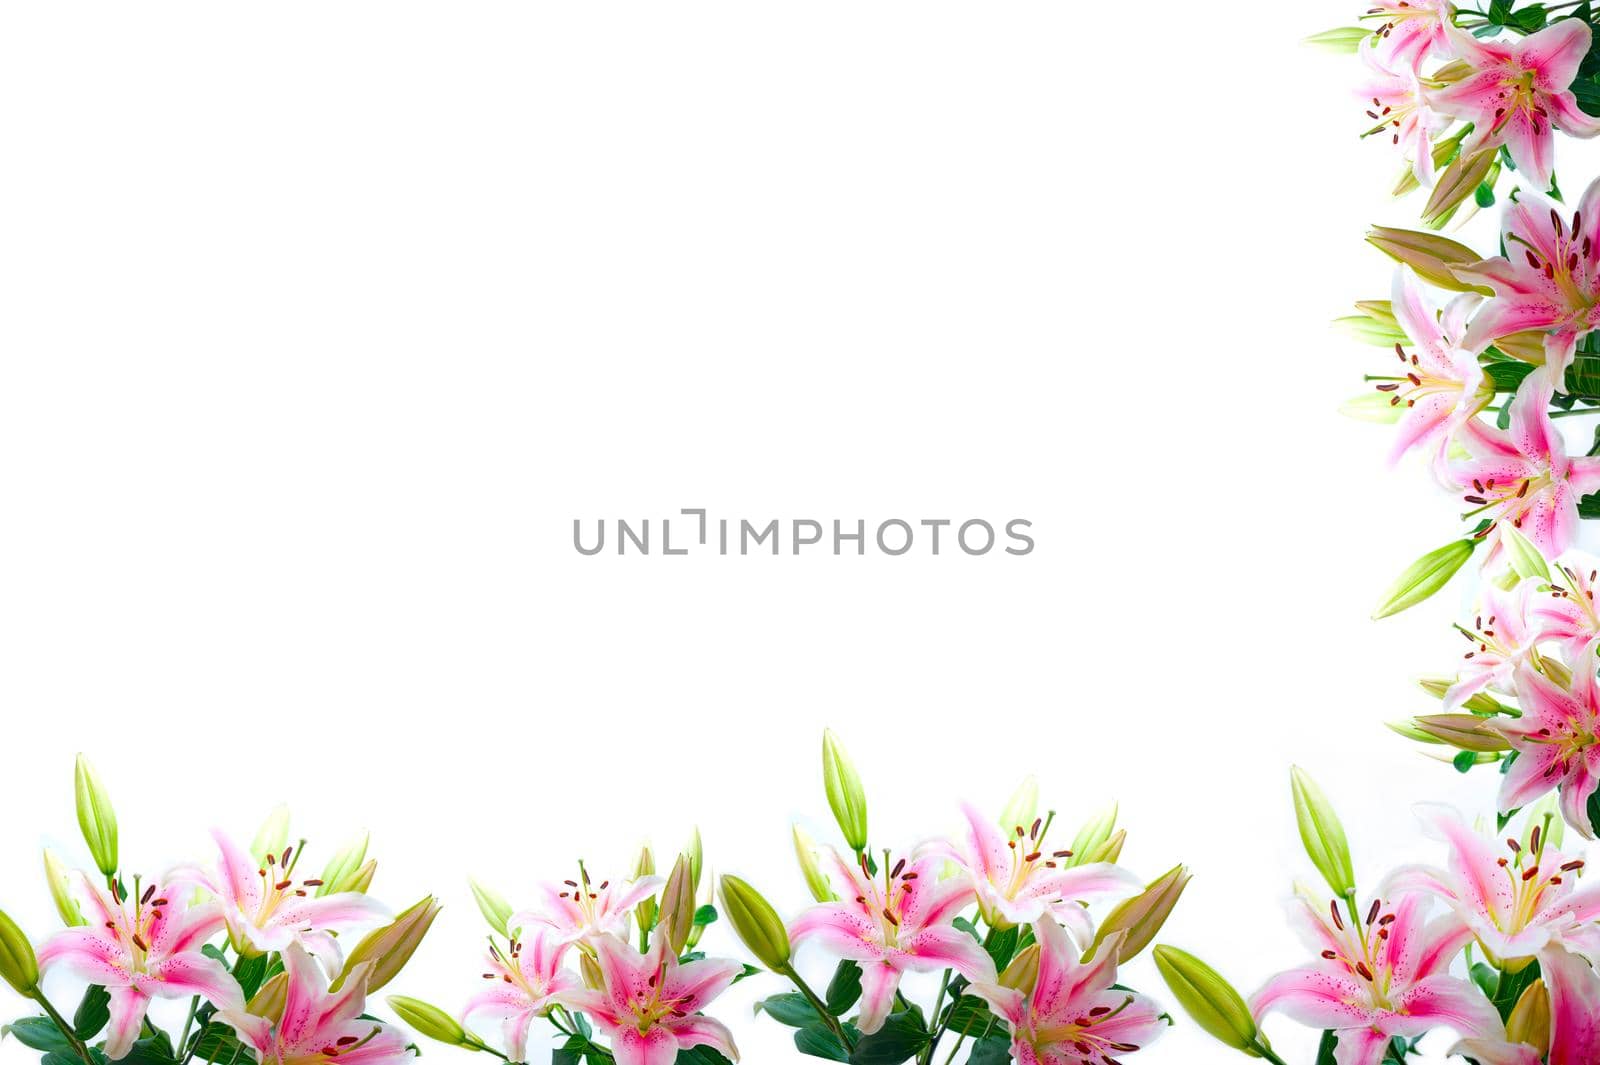 lily flowers composition frame by keko64